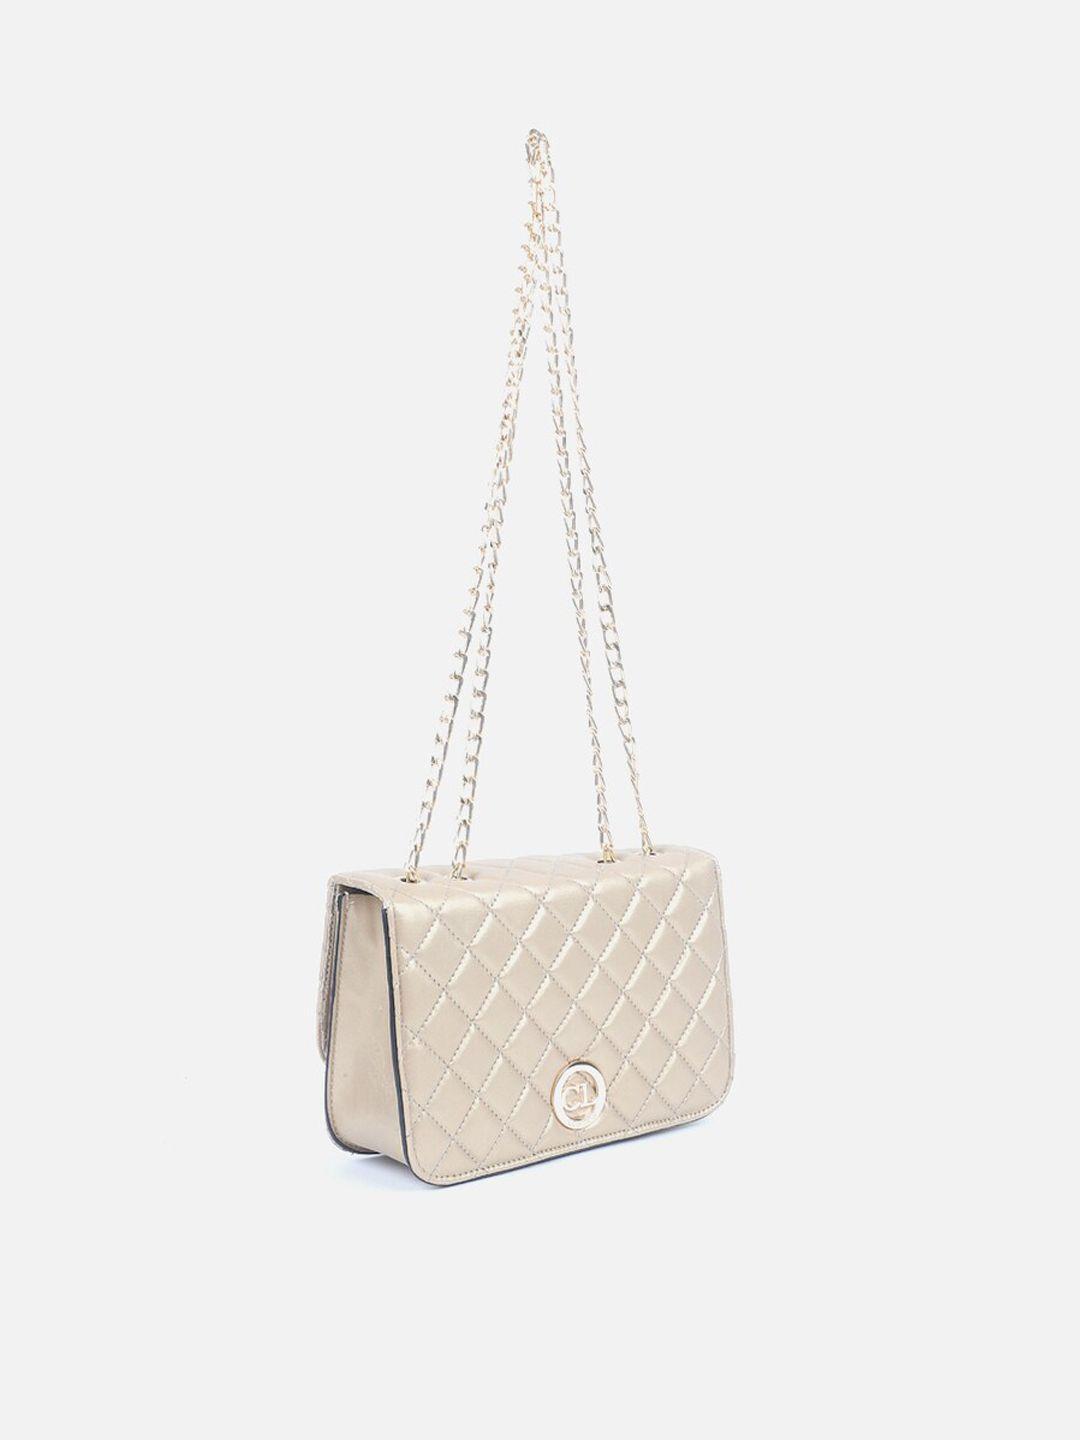 carlton-london-textured-structured-sling-bag-with-quilted